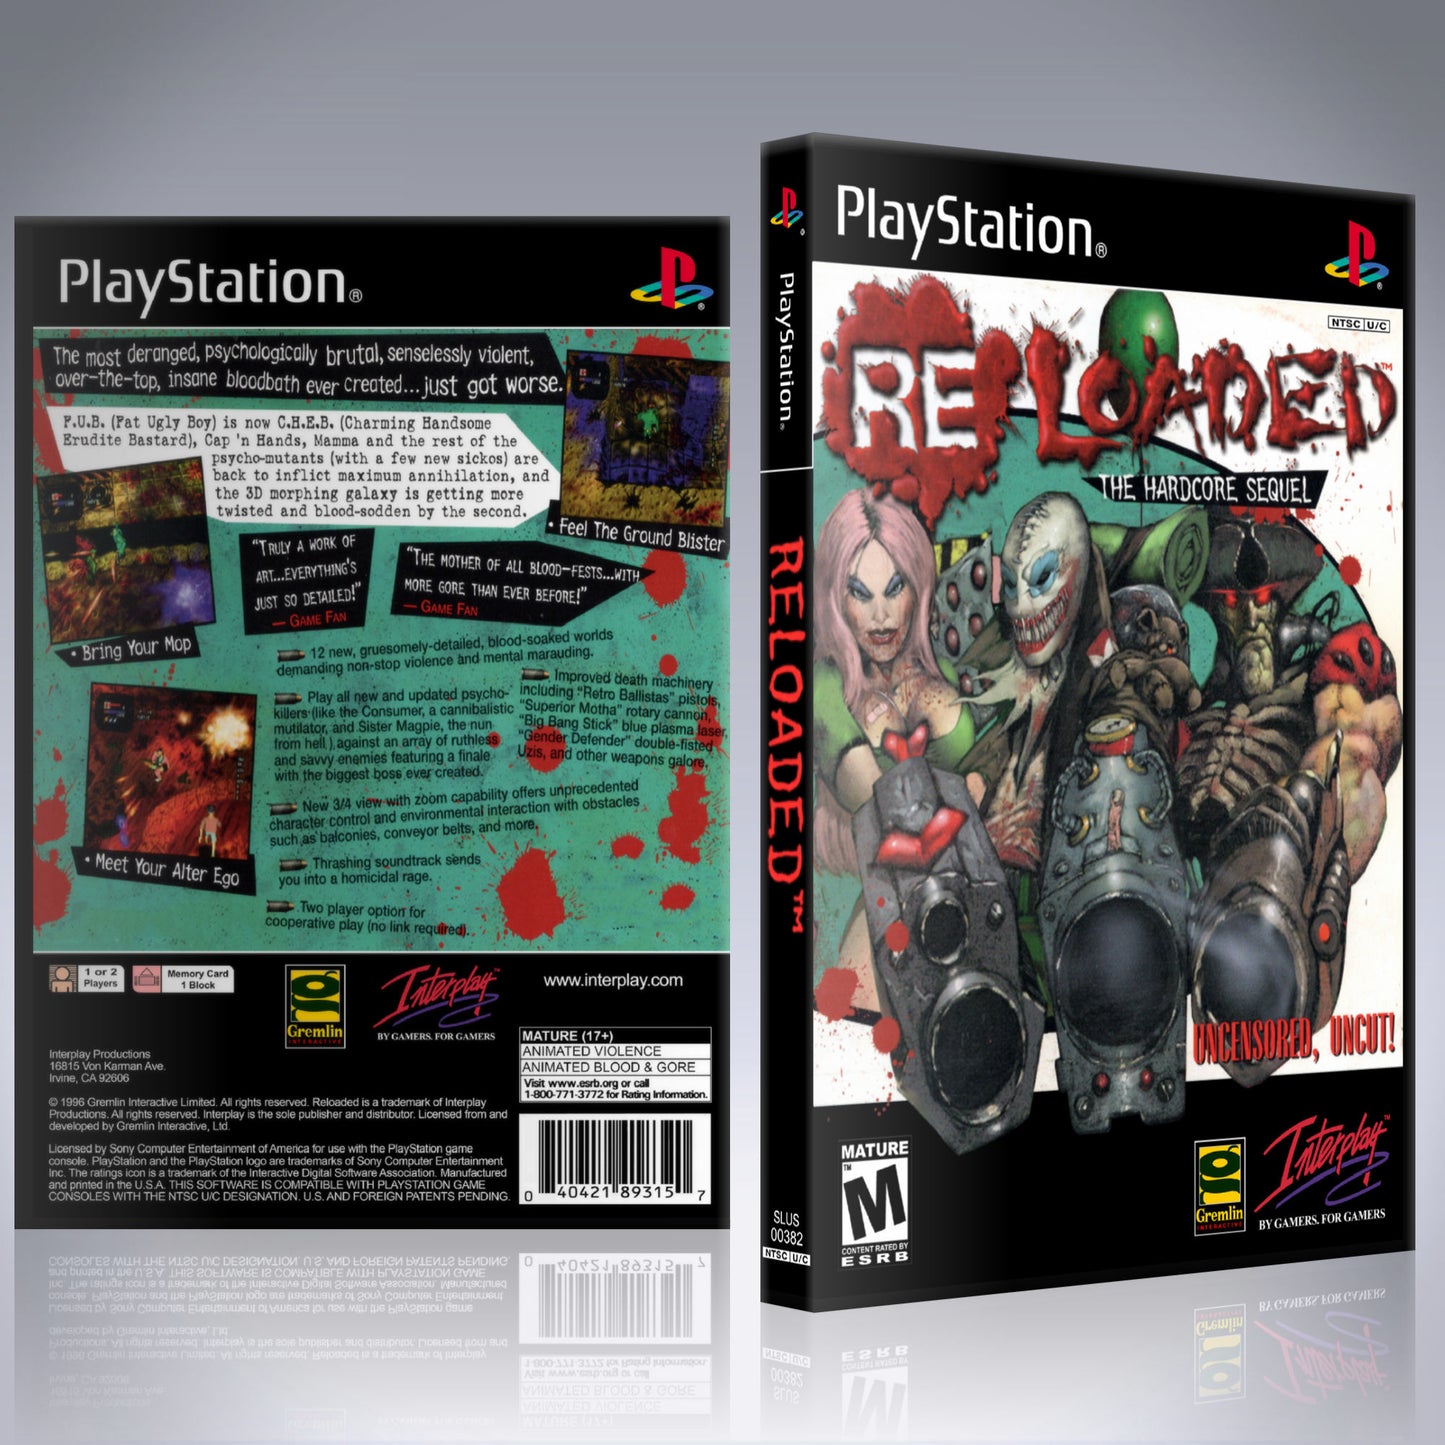 PS1 Case - NO GAME - Reloaded